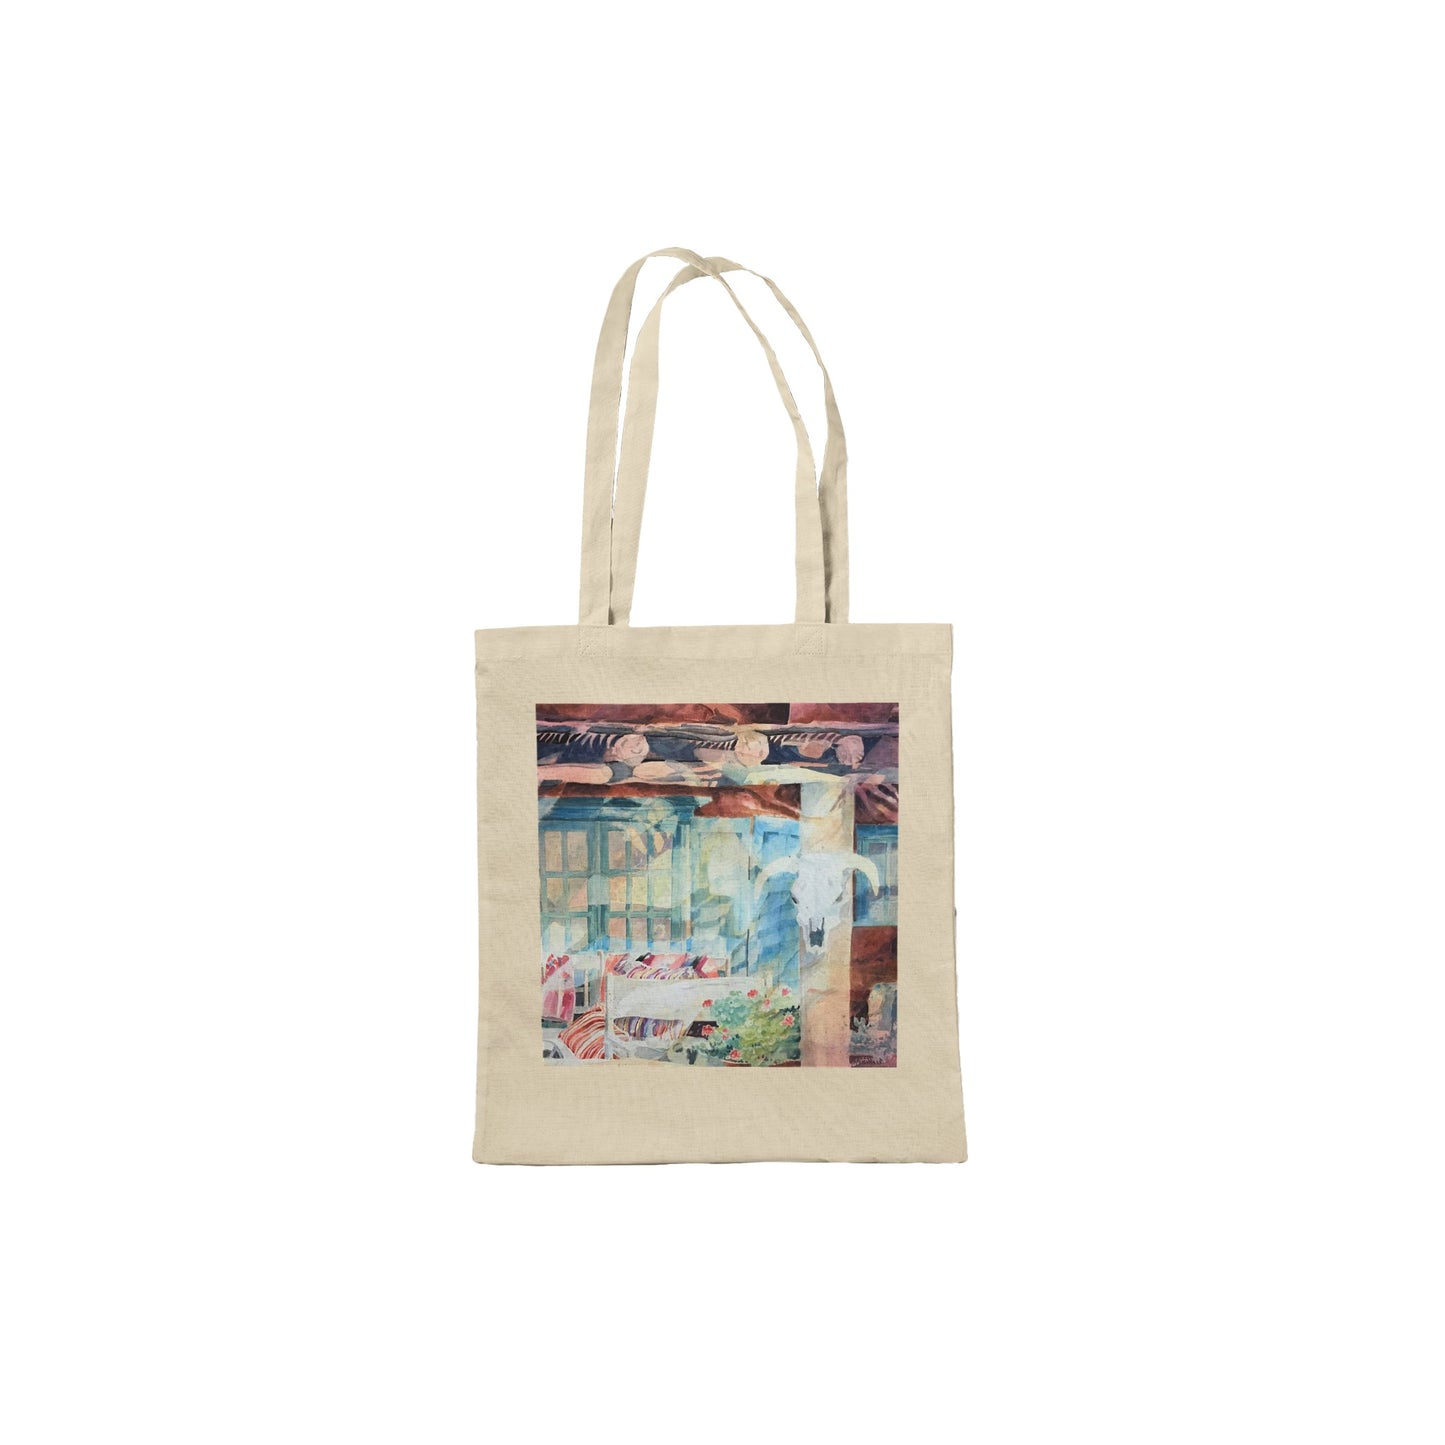 "Southwestern Home" Classic Tote Bag by Barbara Cleary Designs